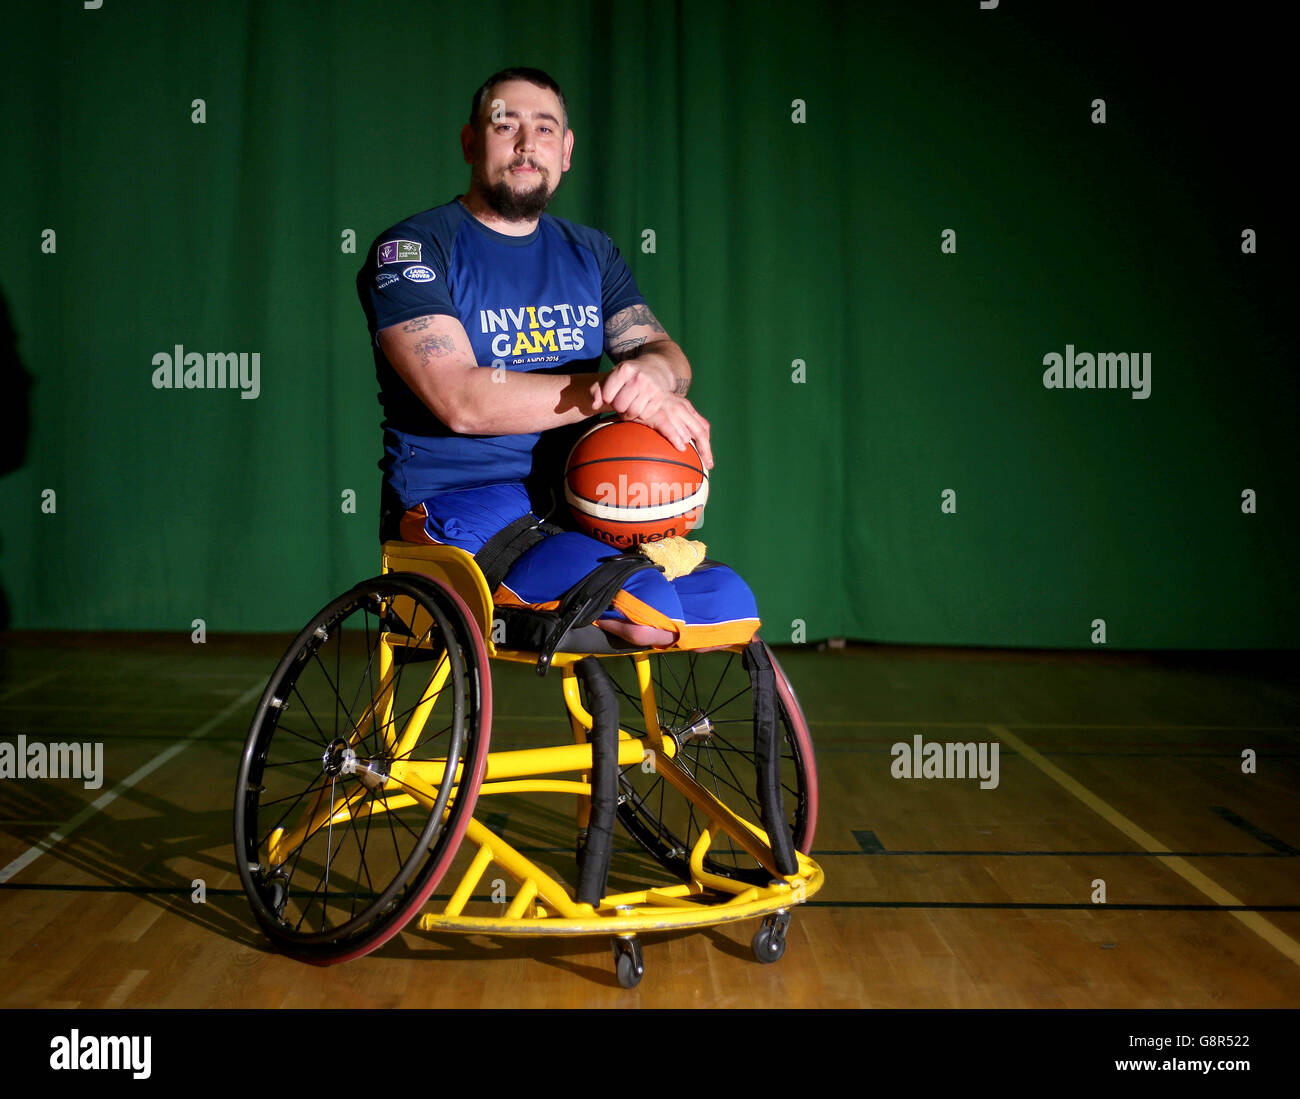 UK wheelchair basketball team training session. Craig Winspear from Hartlepool during a training session for the wheelchair basketball team ahead of the Invictus Games in Orlando Stock Photo